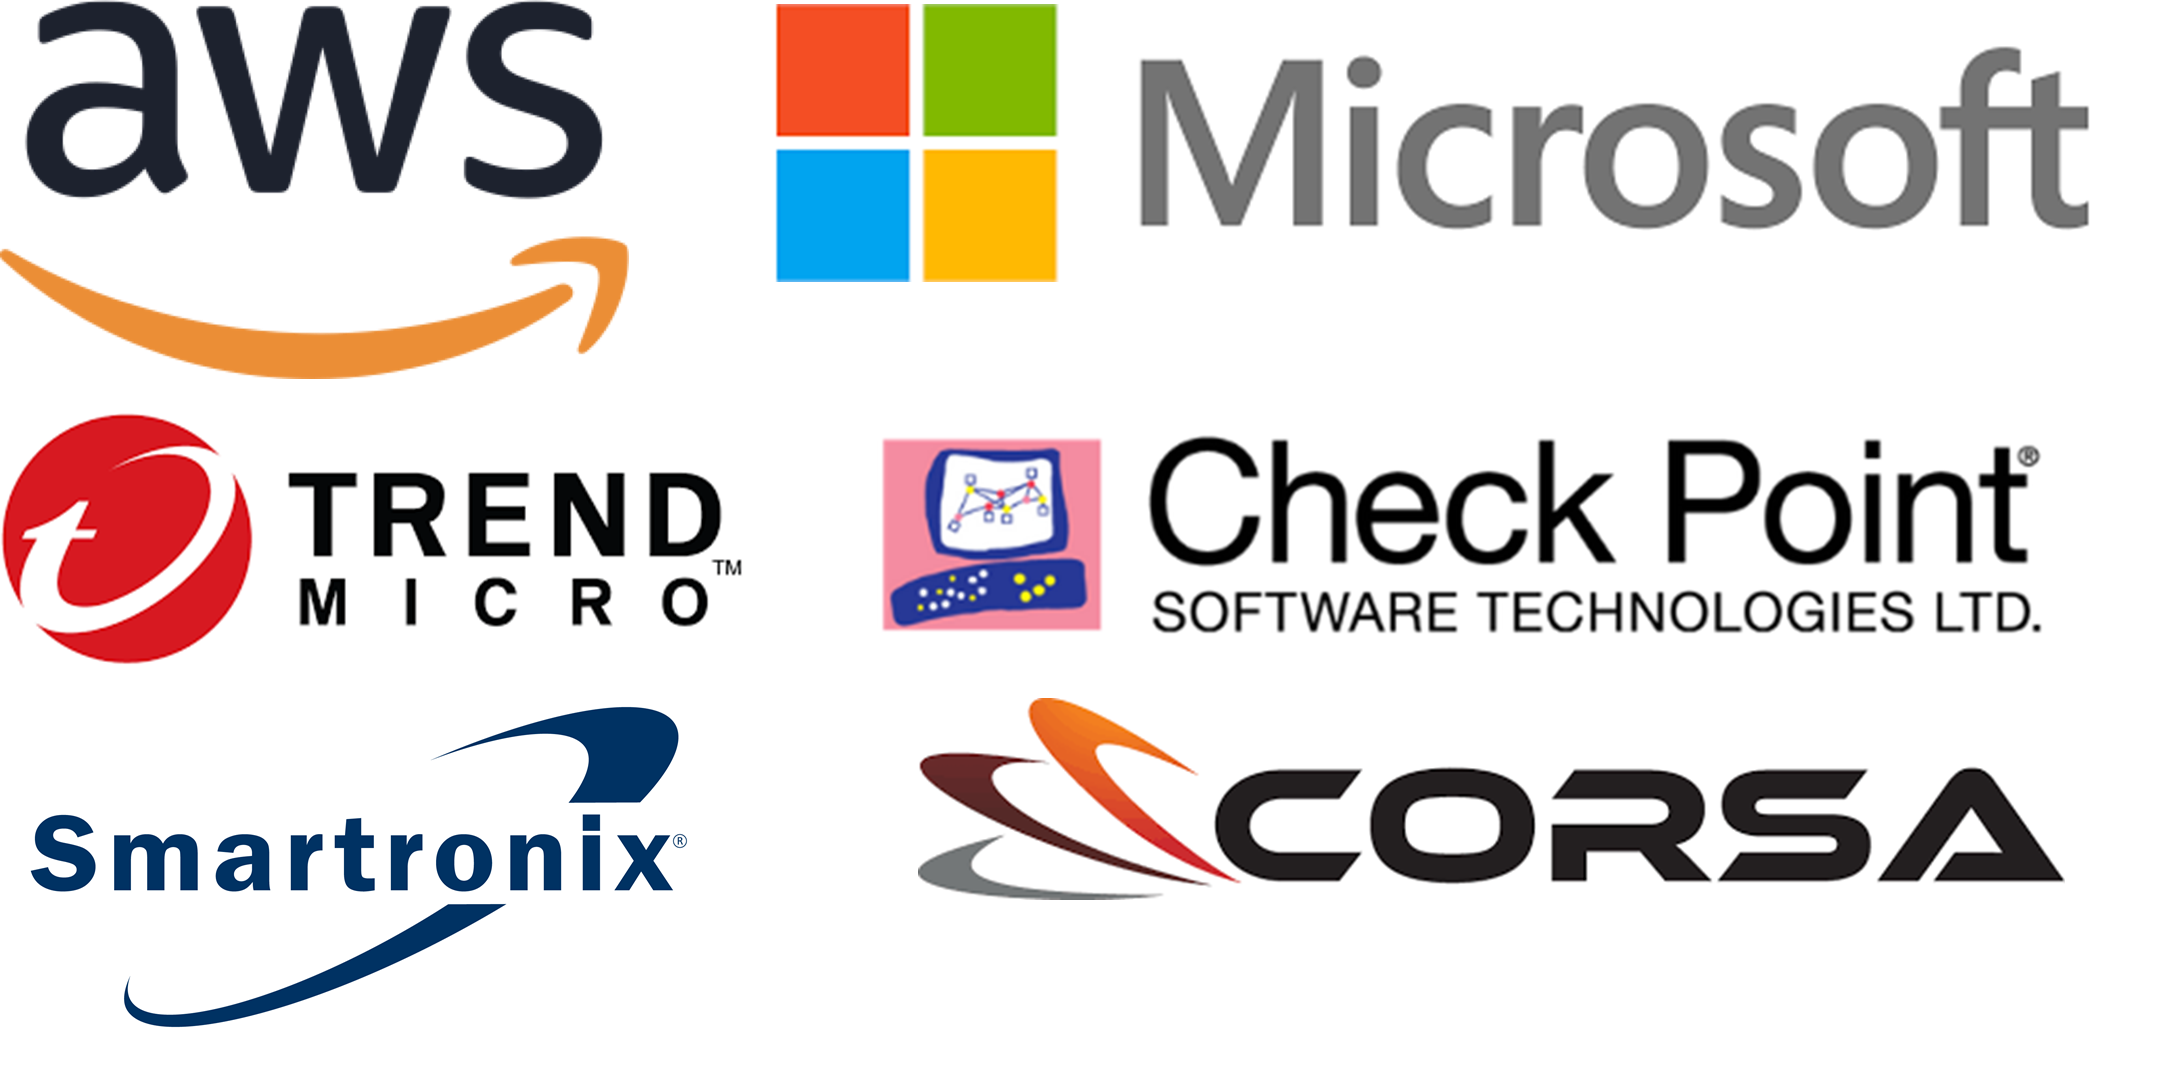 Angelbeat Providence March 6: Amazon, Microsoft, Cloud, Security, AI & More